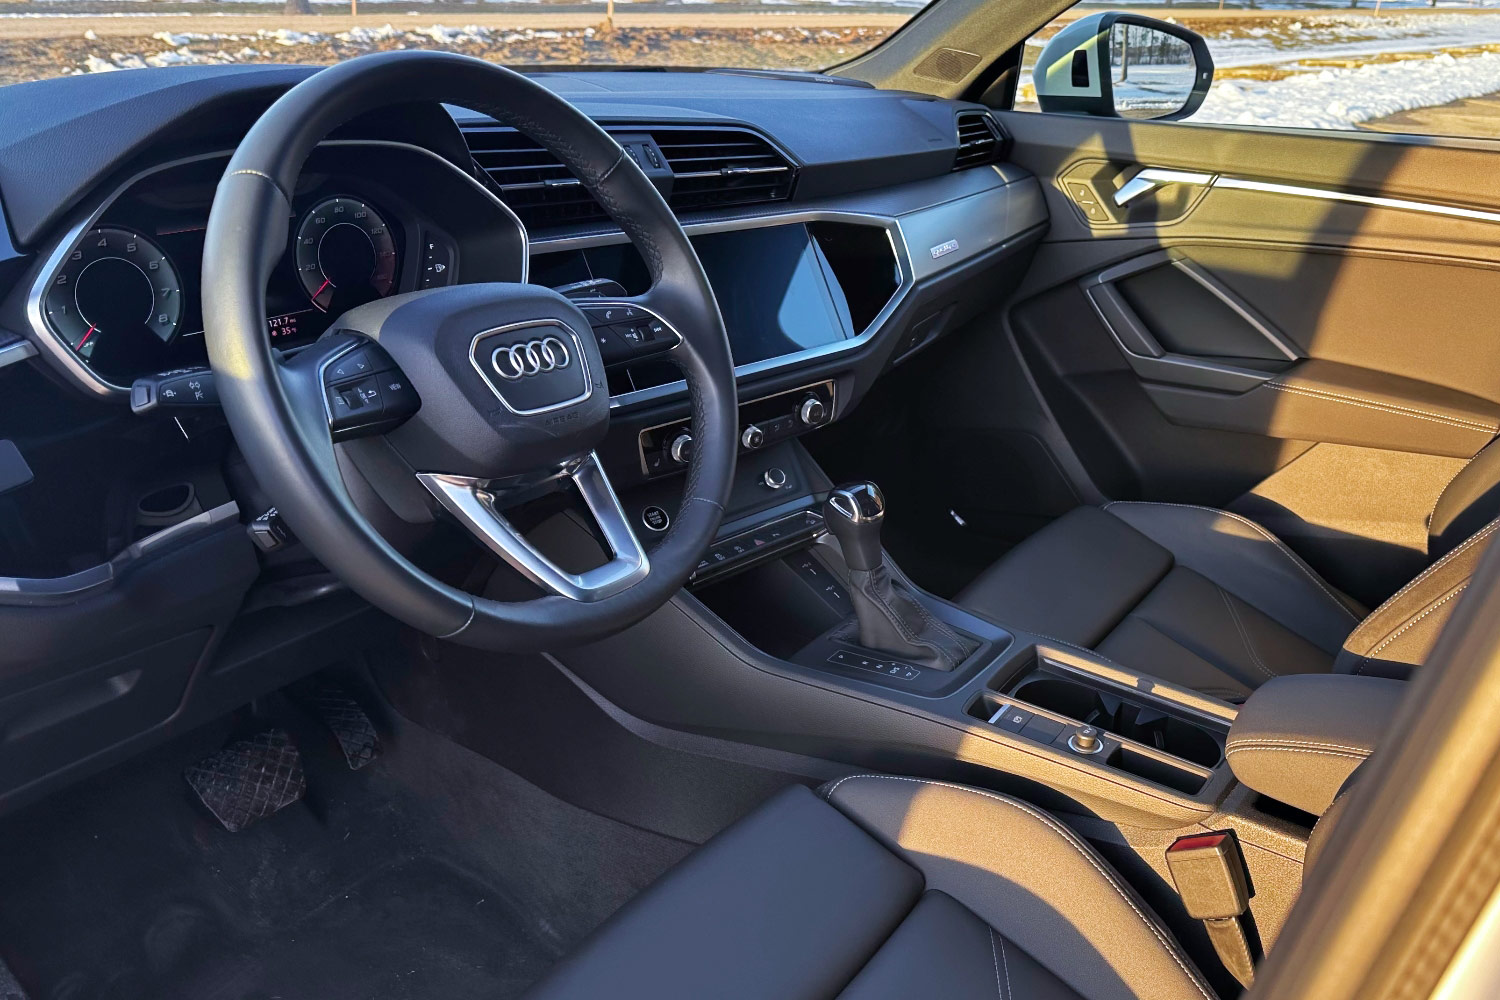 The front seats, steering wheel, dashboard, and center console of an Audi Q3.